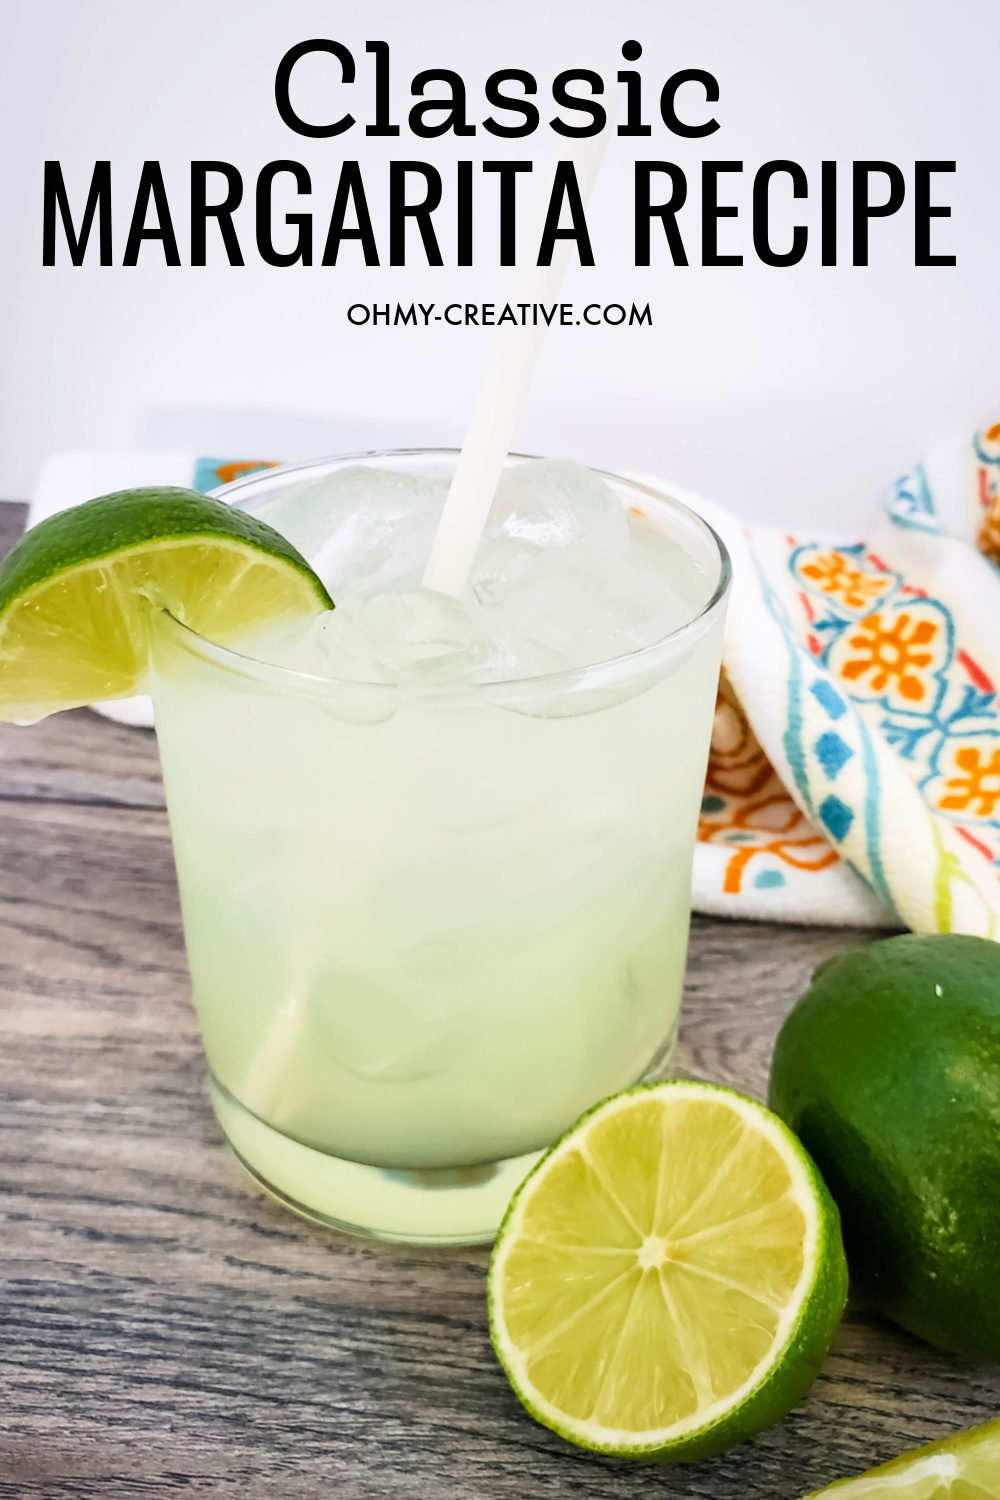 A tasty classic margarita in a tumbler glass with straw garnished with fresh limes. This tasty drink sits on a wood table with a decorative napkin in the background.